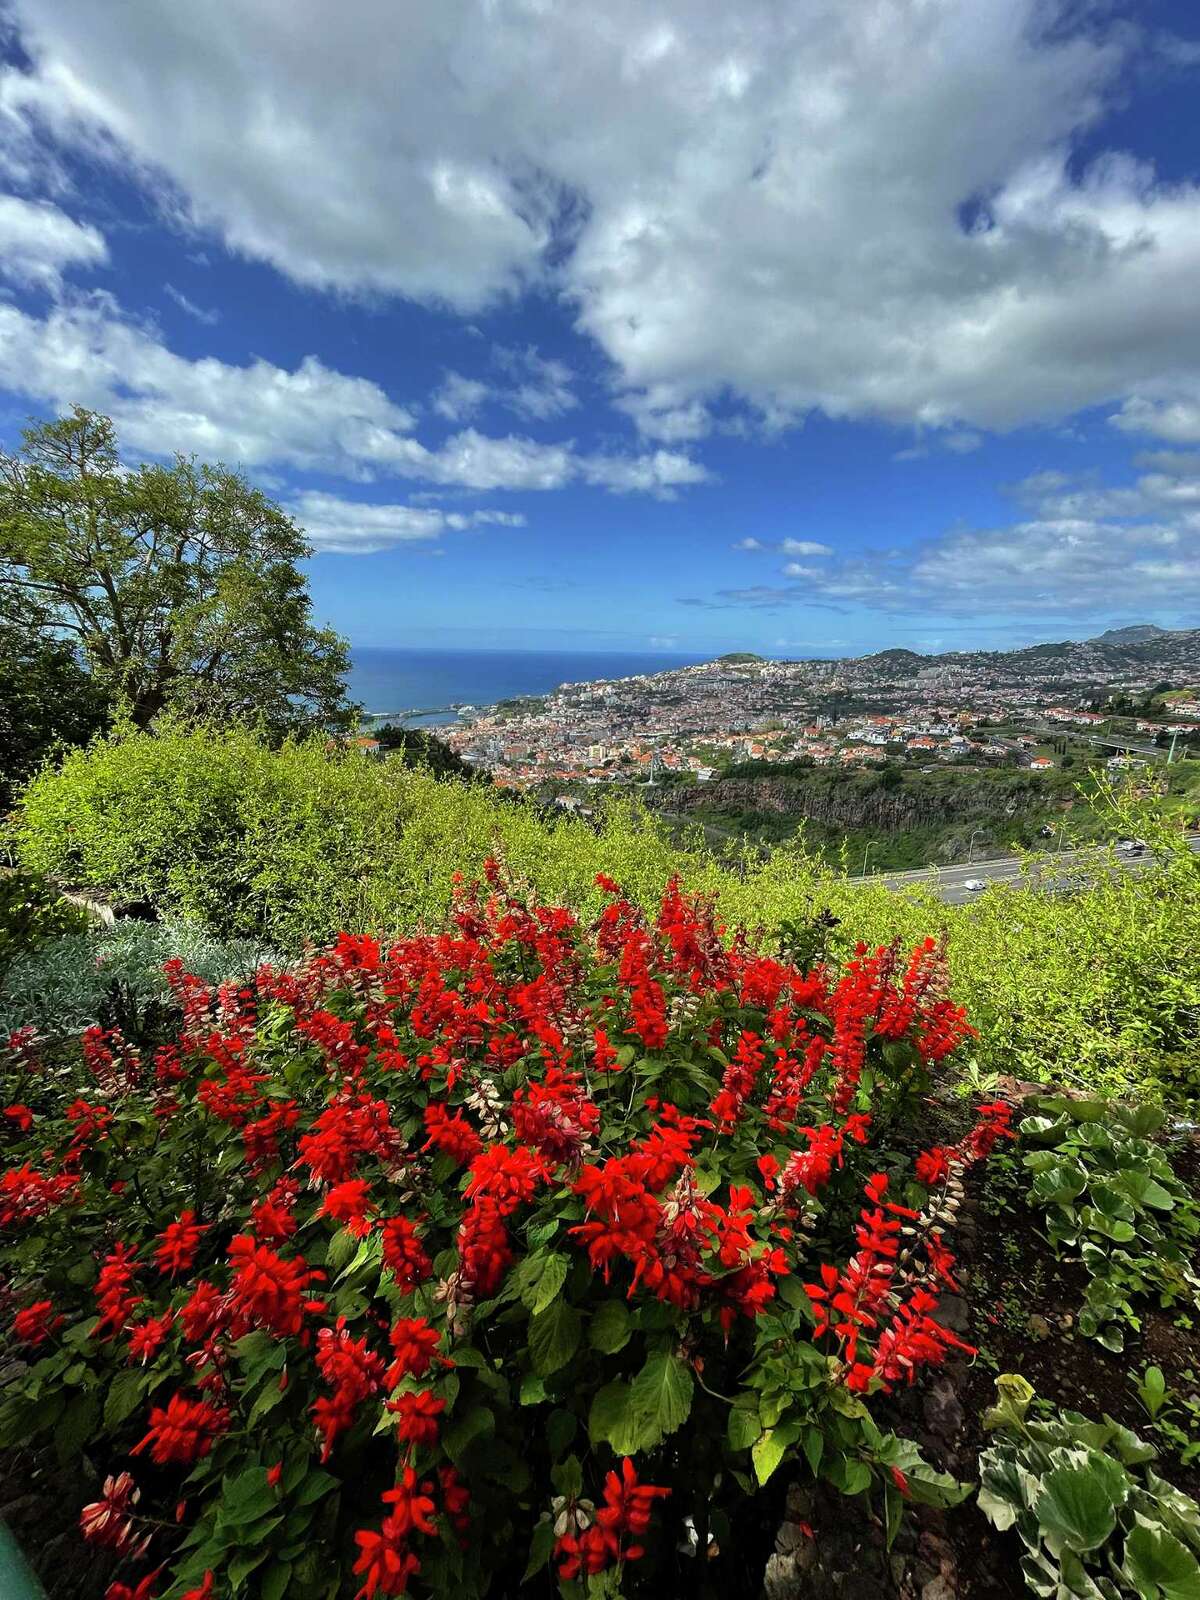 The Madeira Botanical Garden is one of Funchal's main tourist attractions.